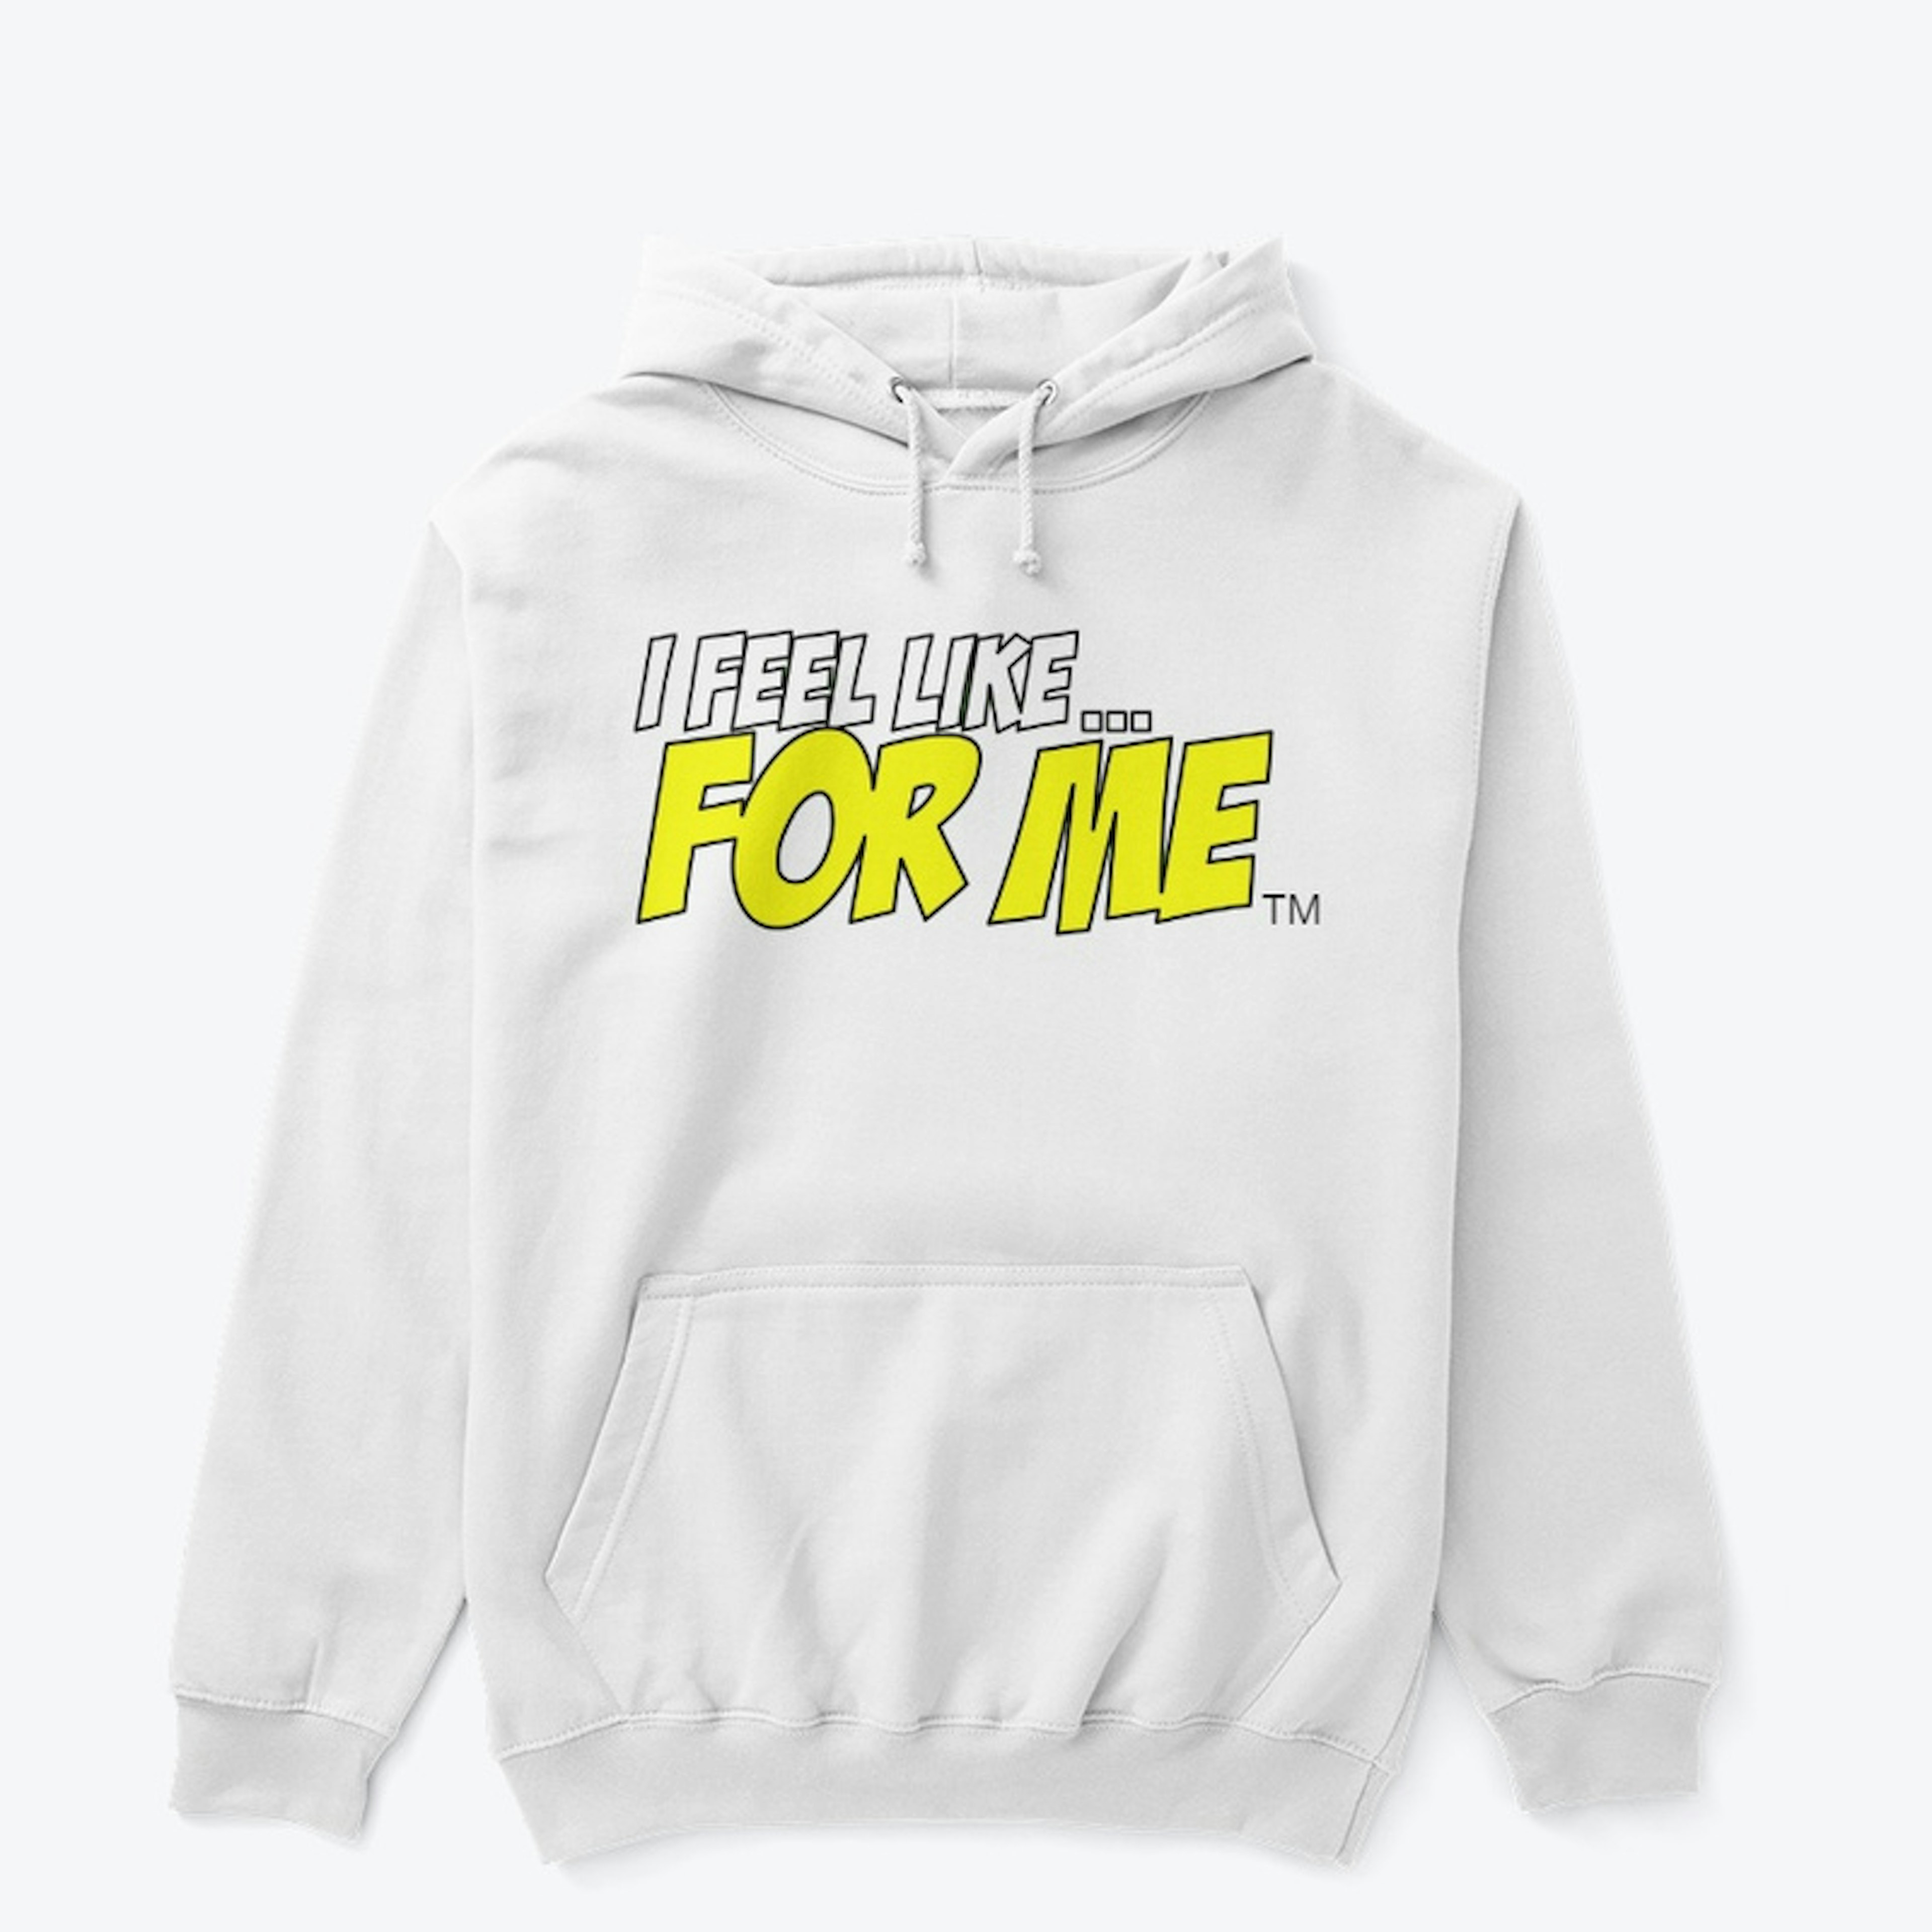 FOR ME MERCH